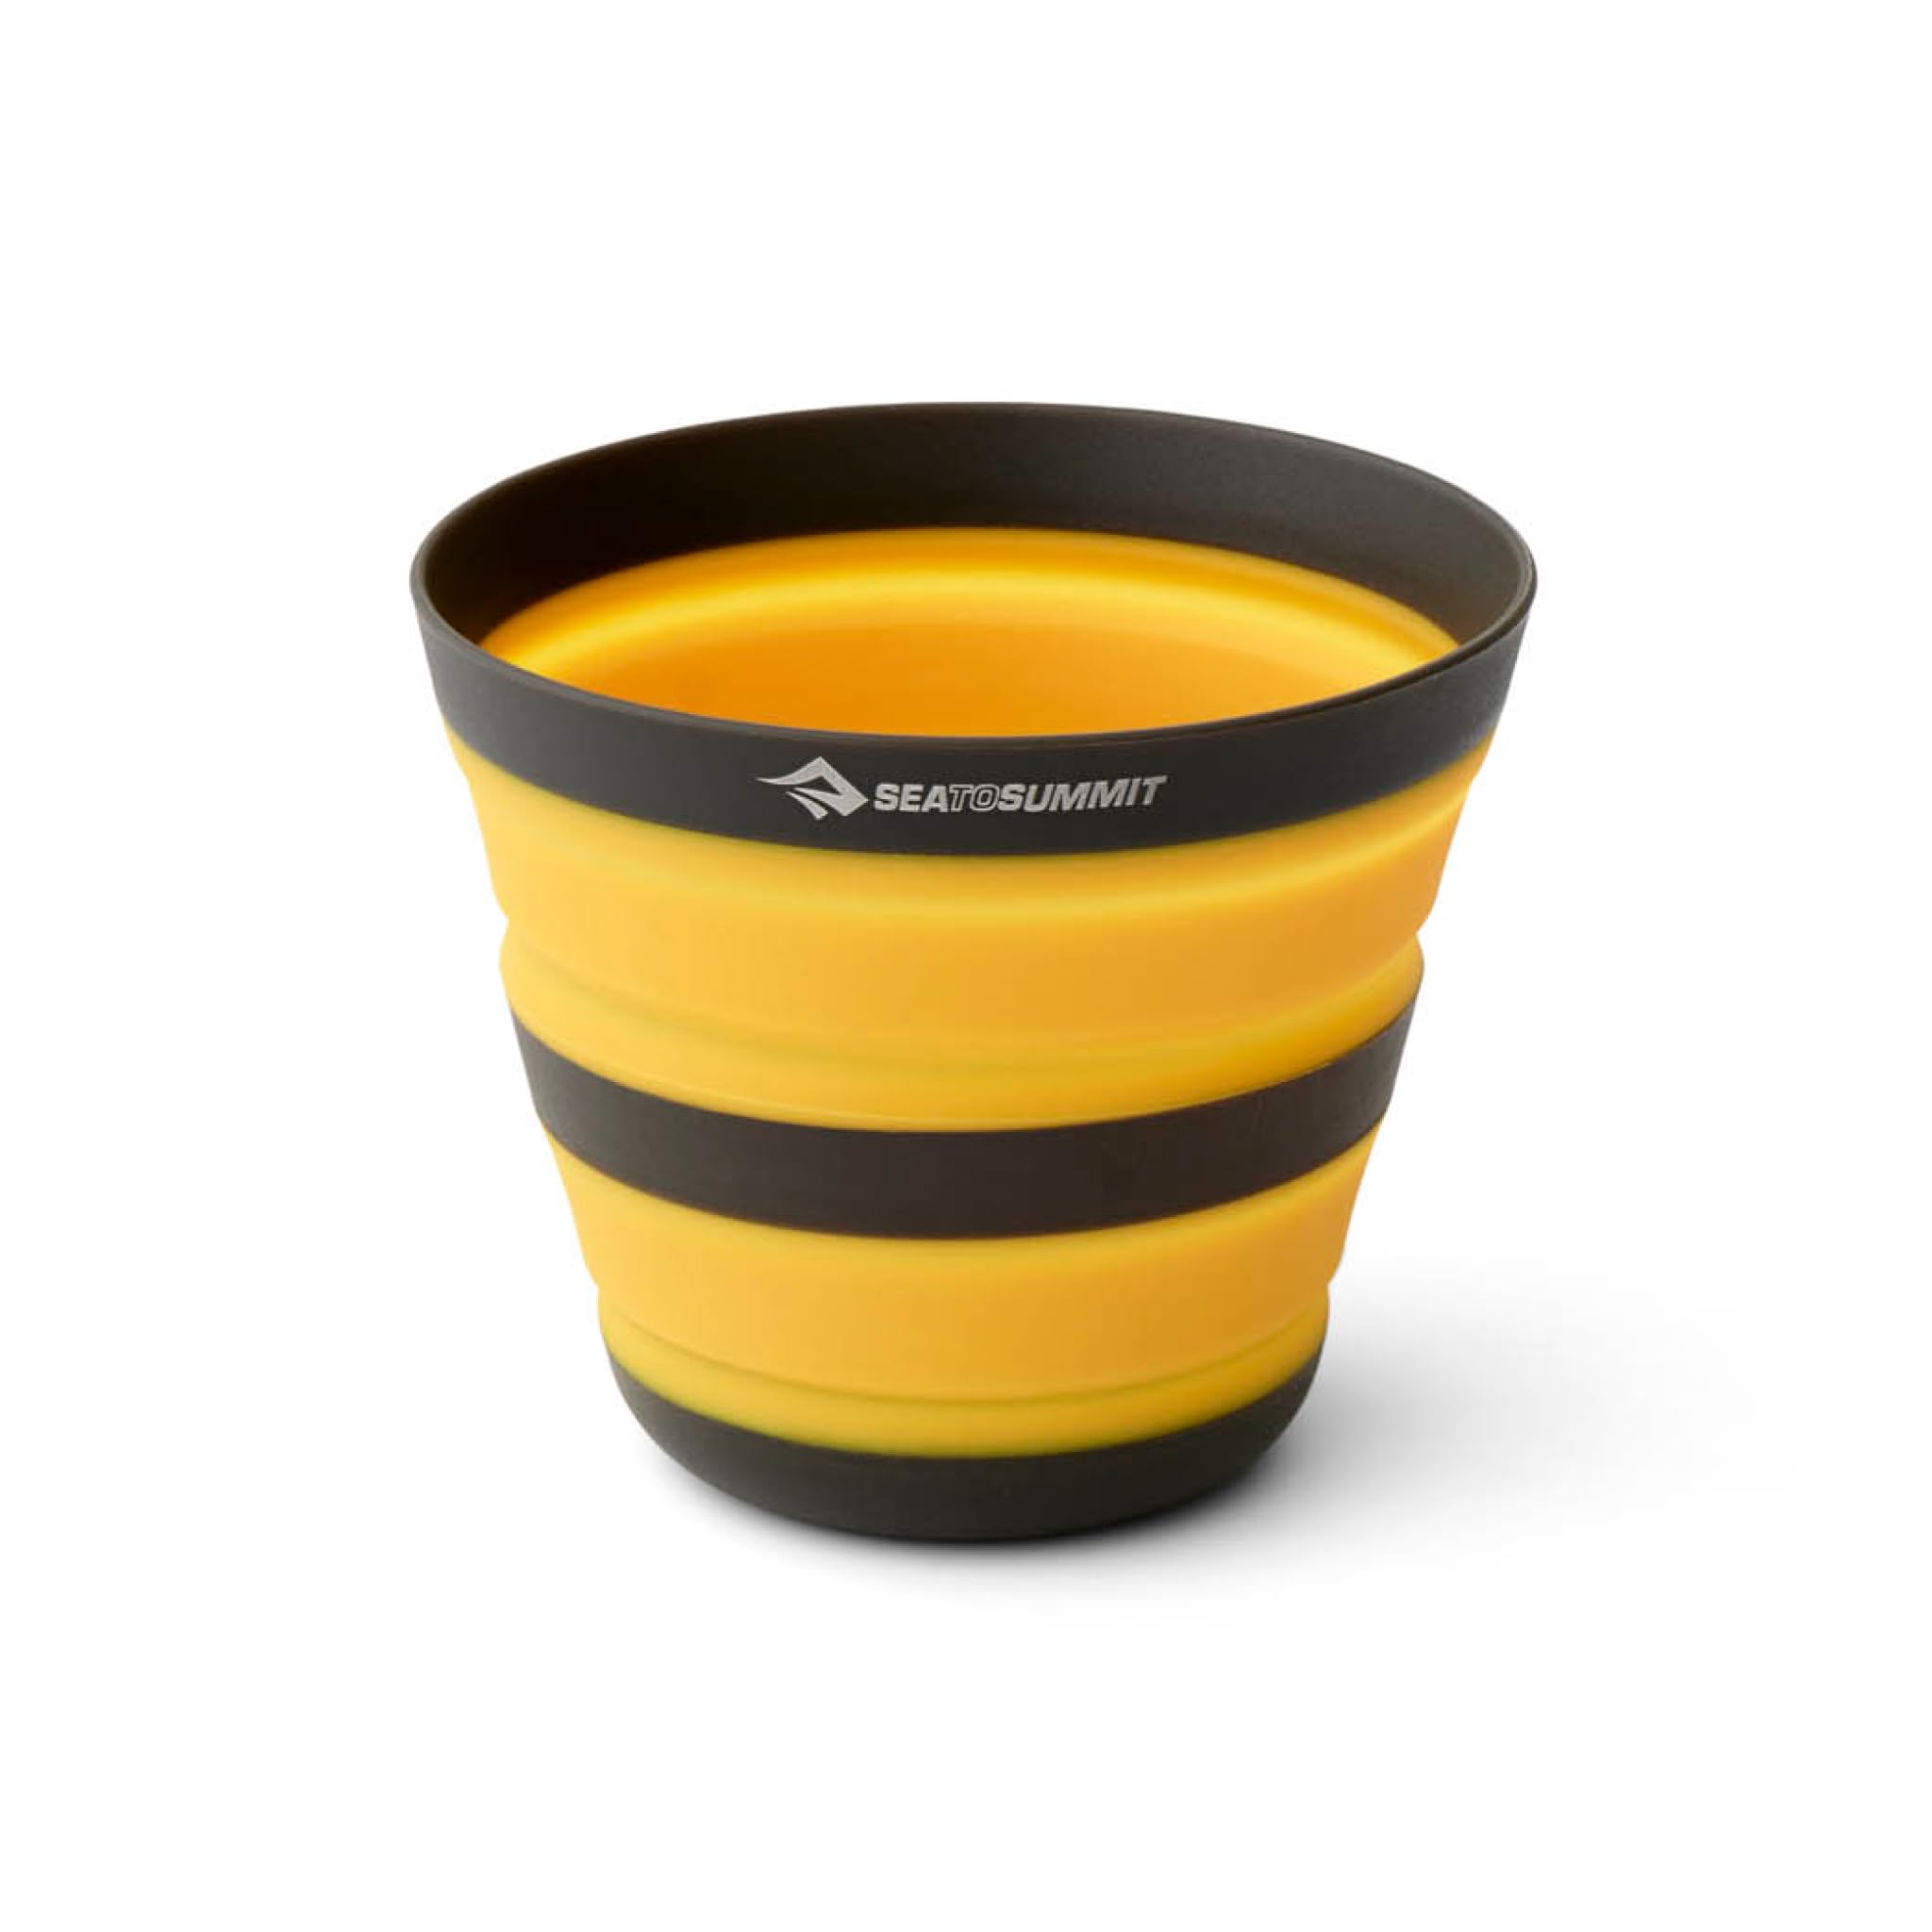 Sea to Summit Frontier UL Collapsible Cup - Falt-Becher yellow